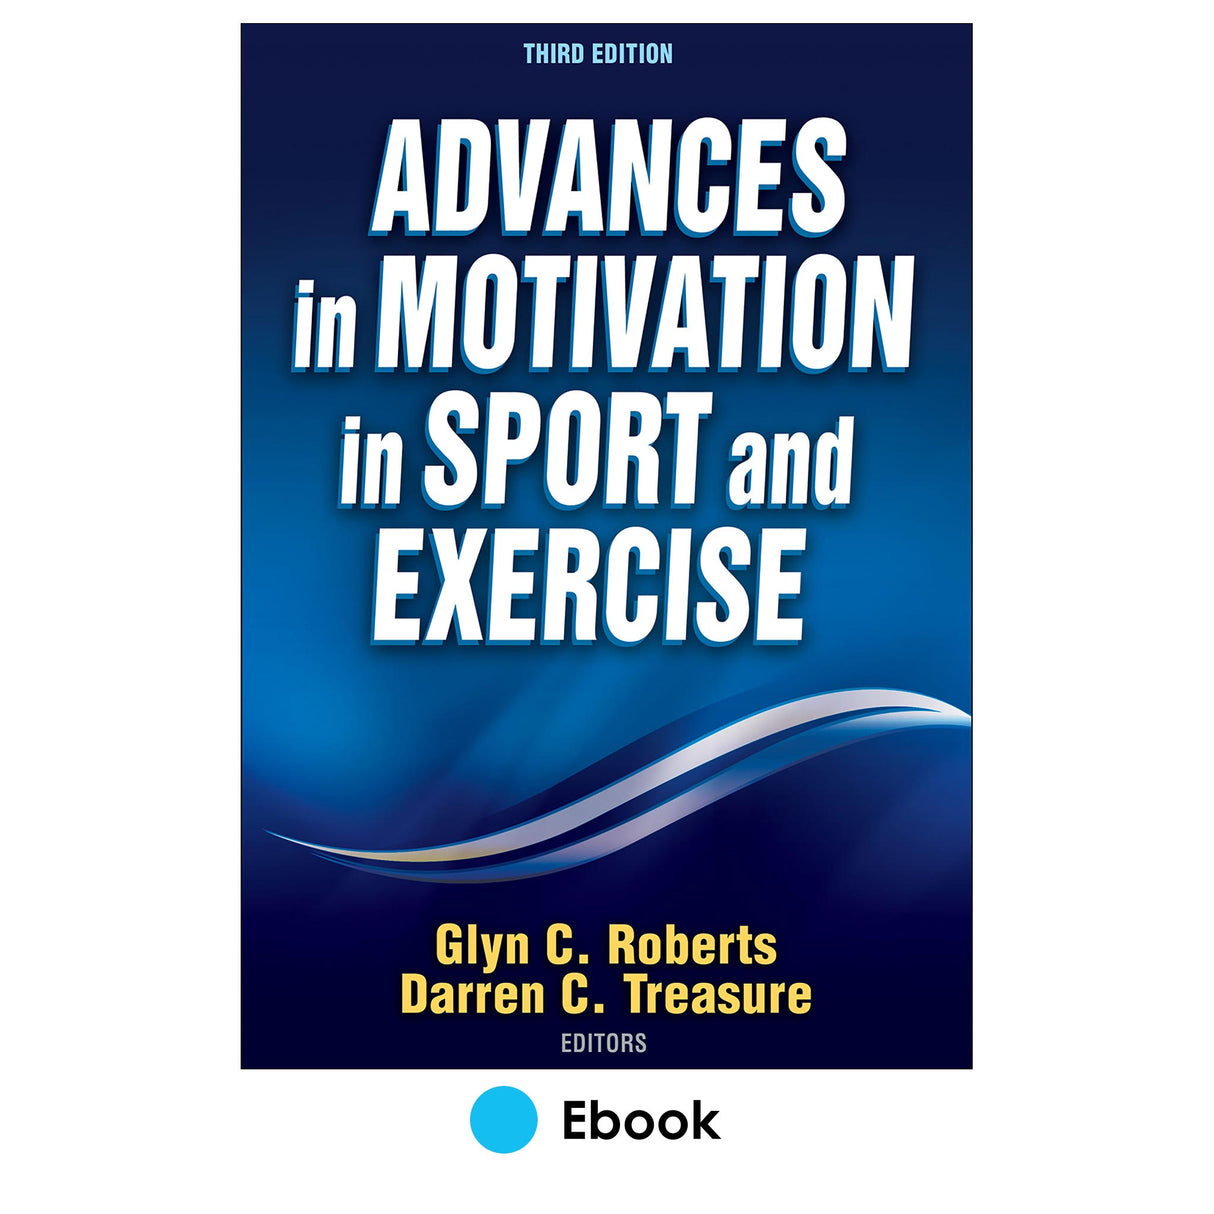 Advances in Motivation in Sport and Exercise 3rd Edition PDF